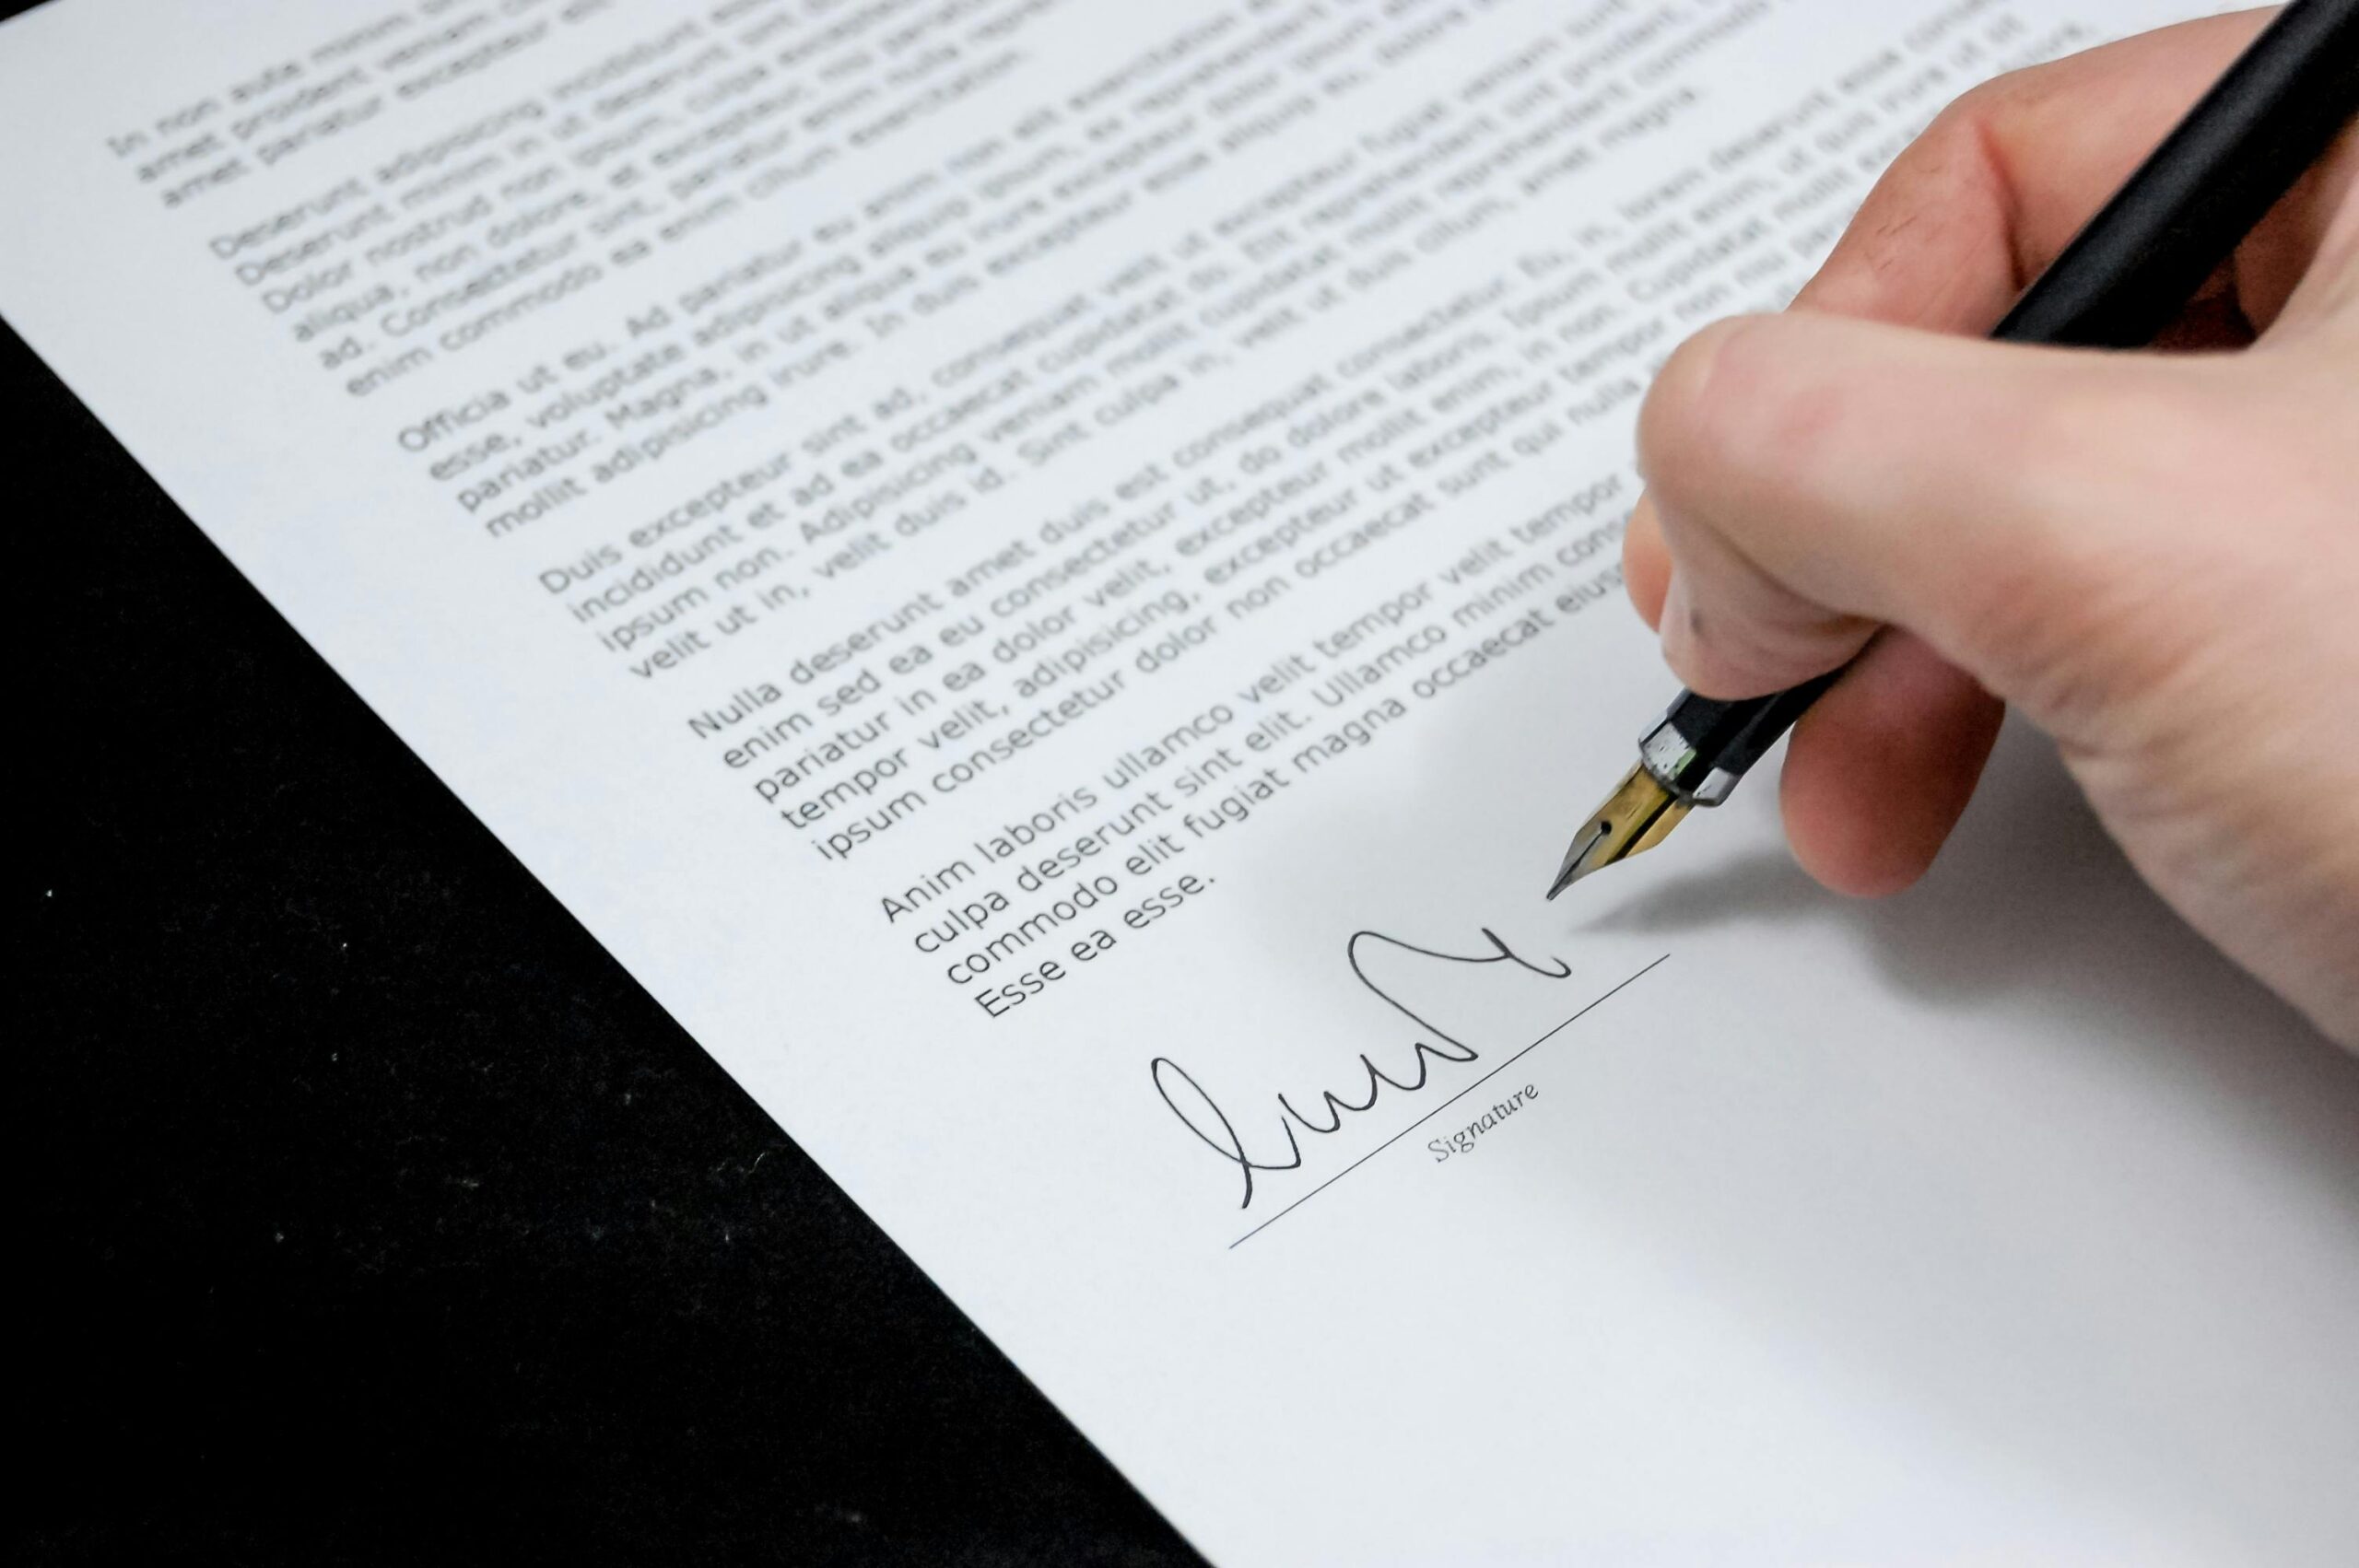 Signing the legal document to finalize the sale of a business 